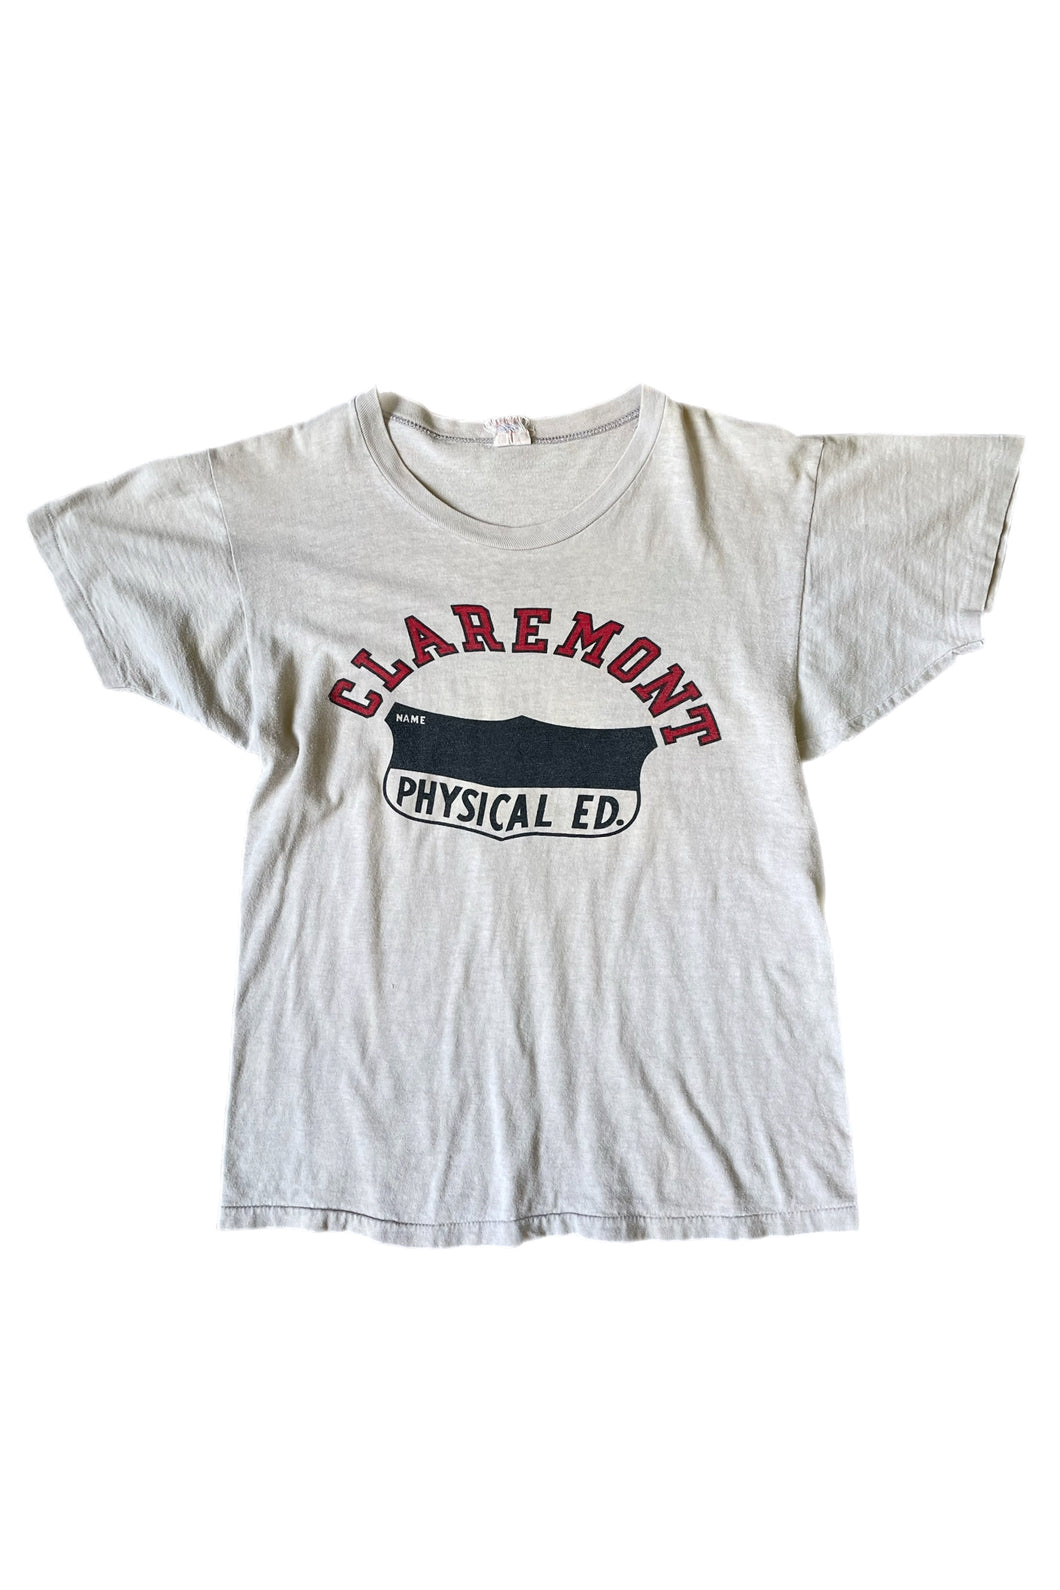 Vintage 1950's Claremont Physical Ed. T-Shirt